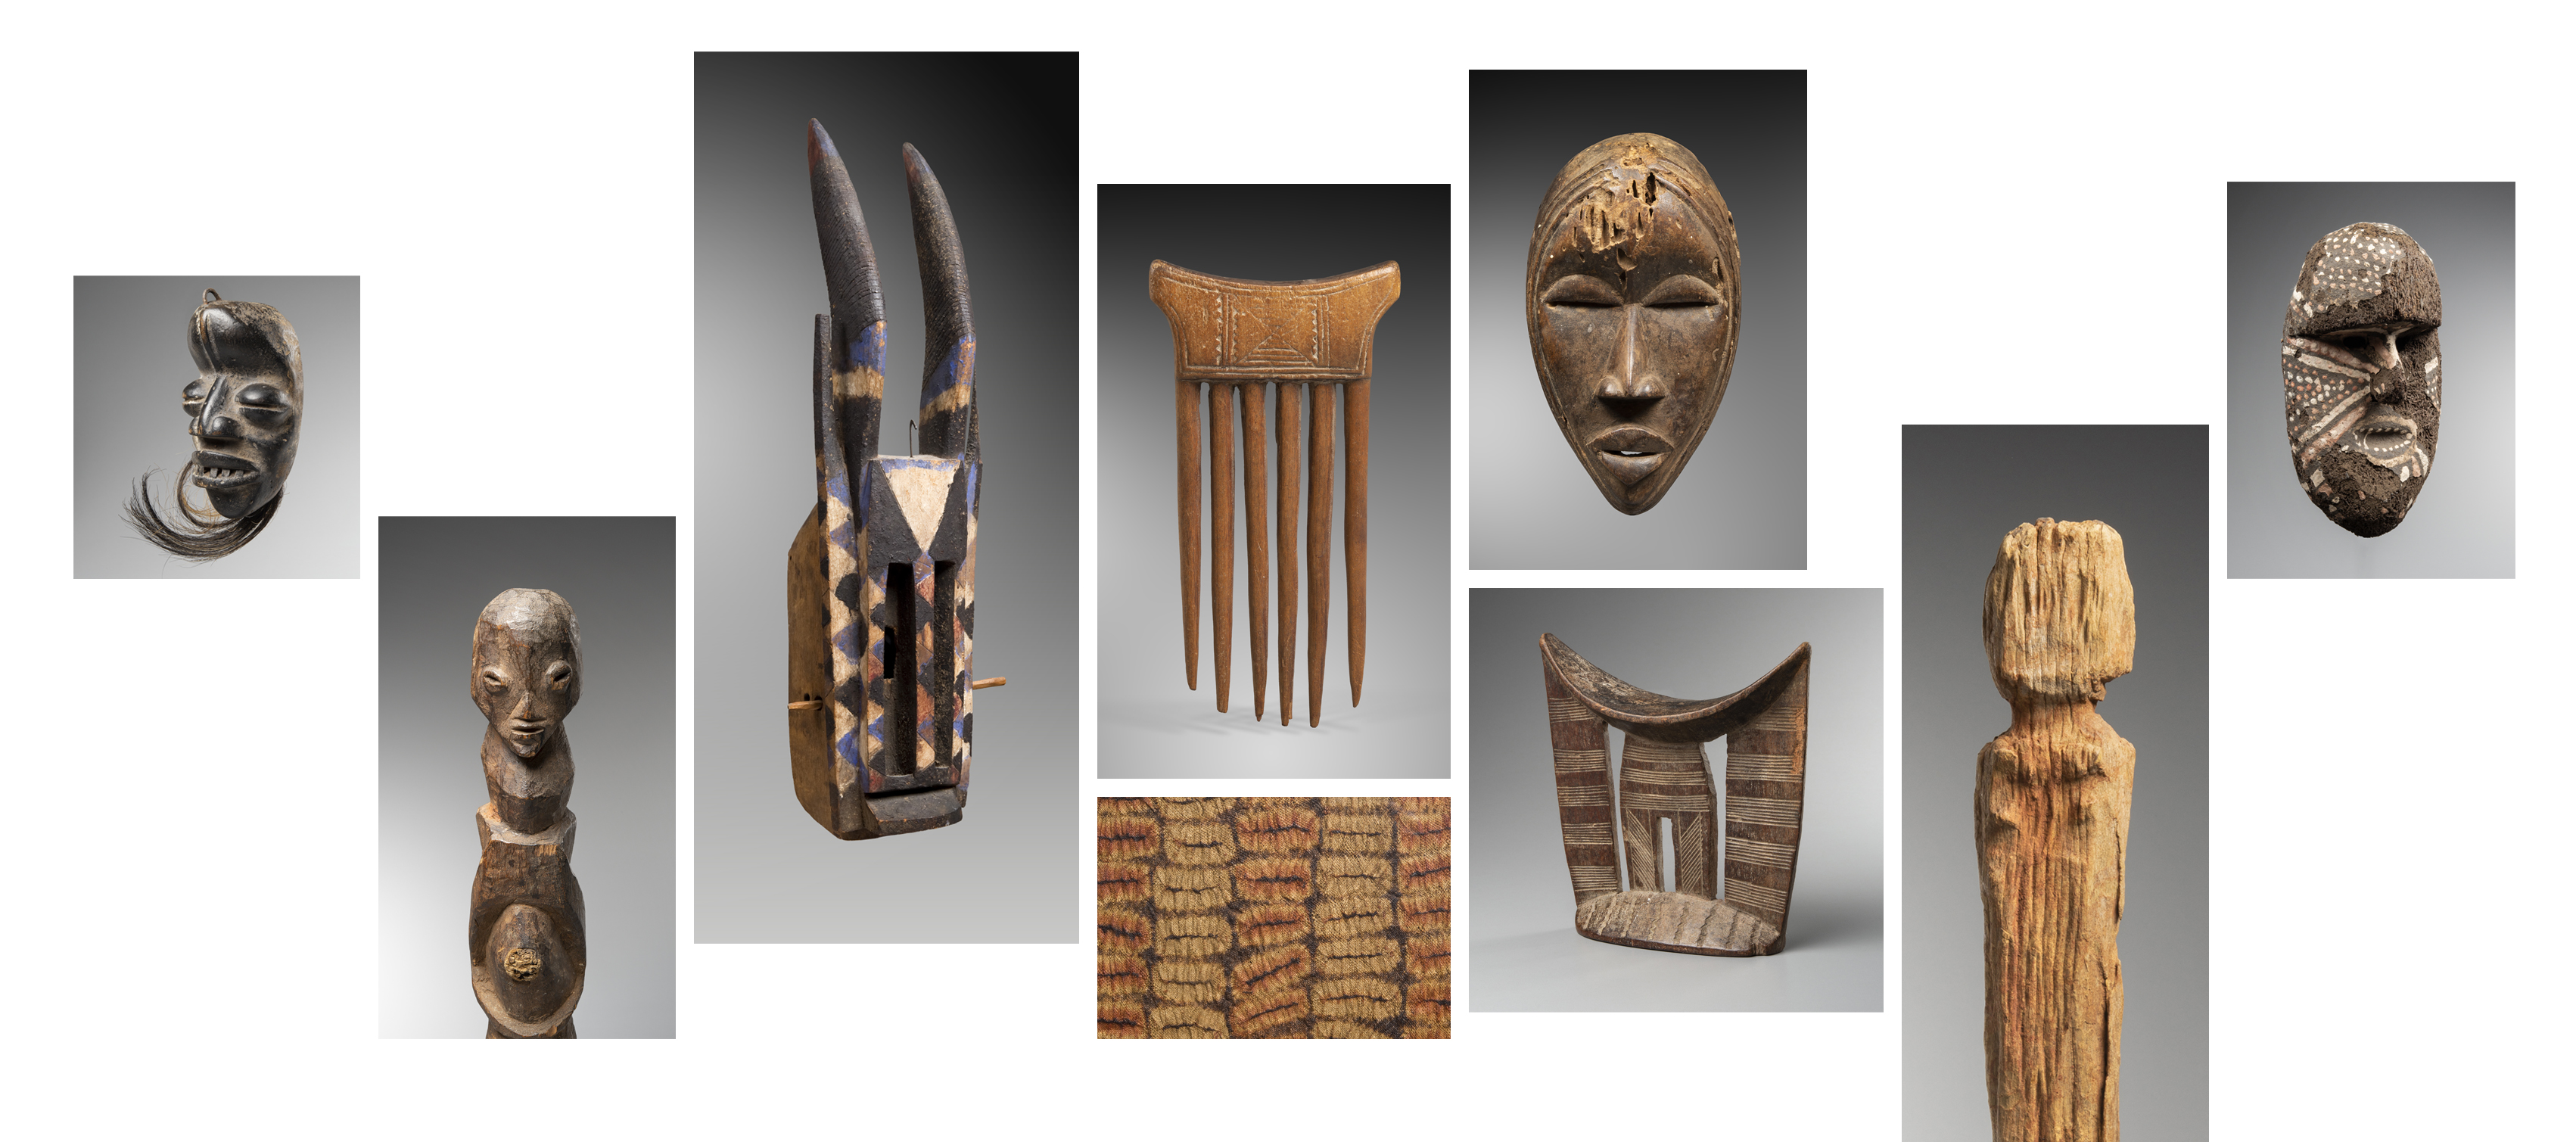 THE ARTS OF AFRICA AND OCEANIA